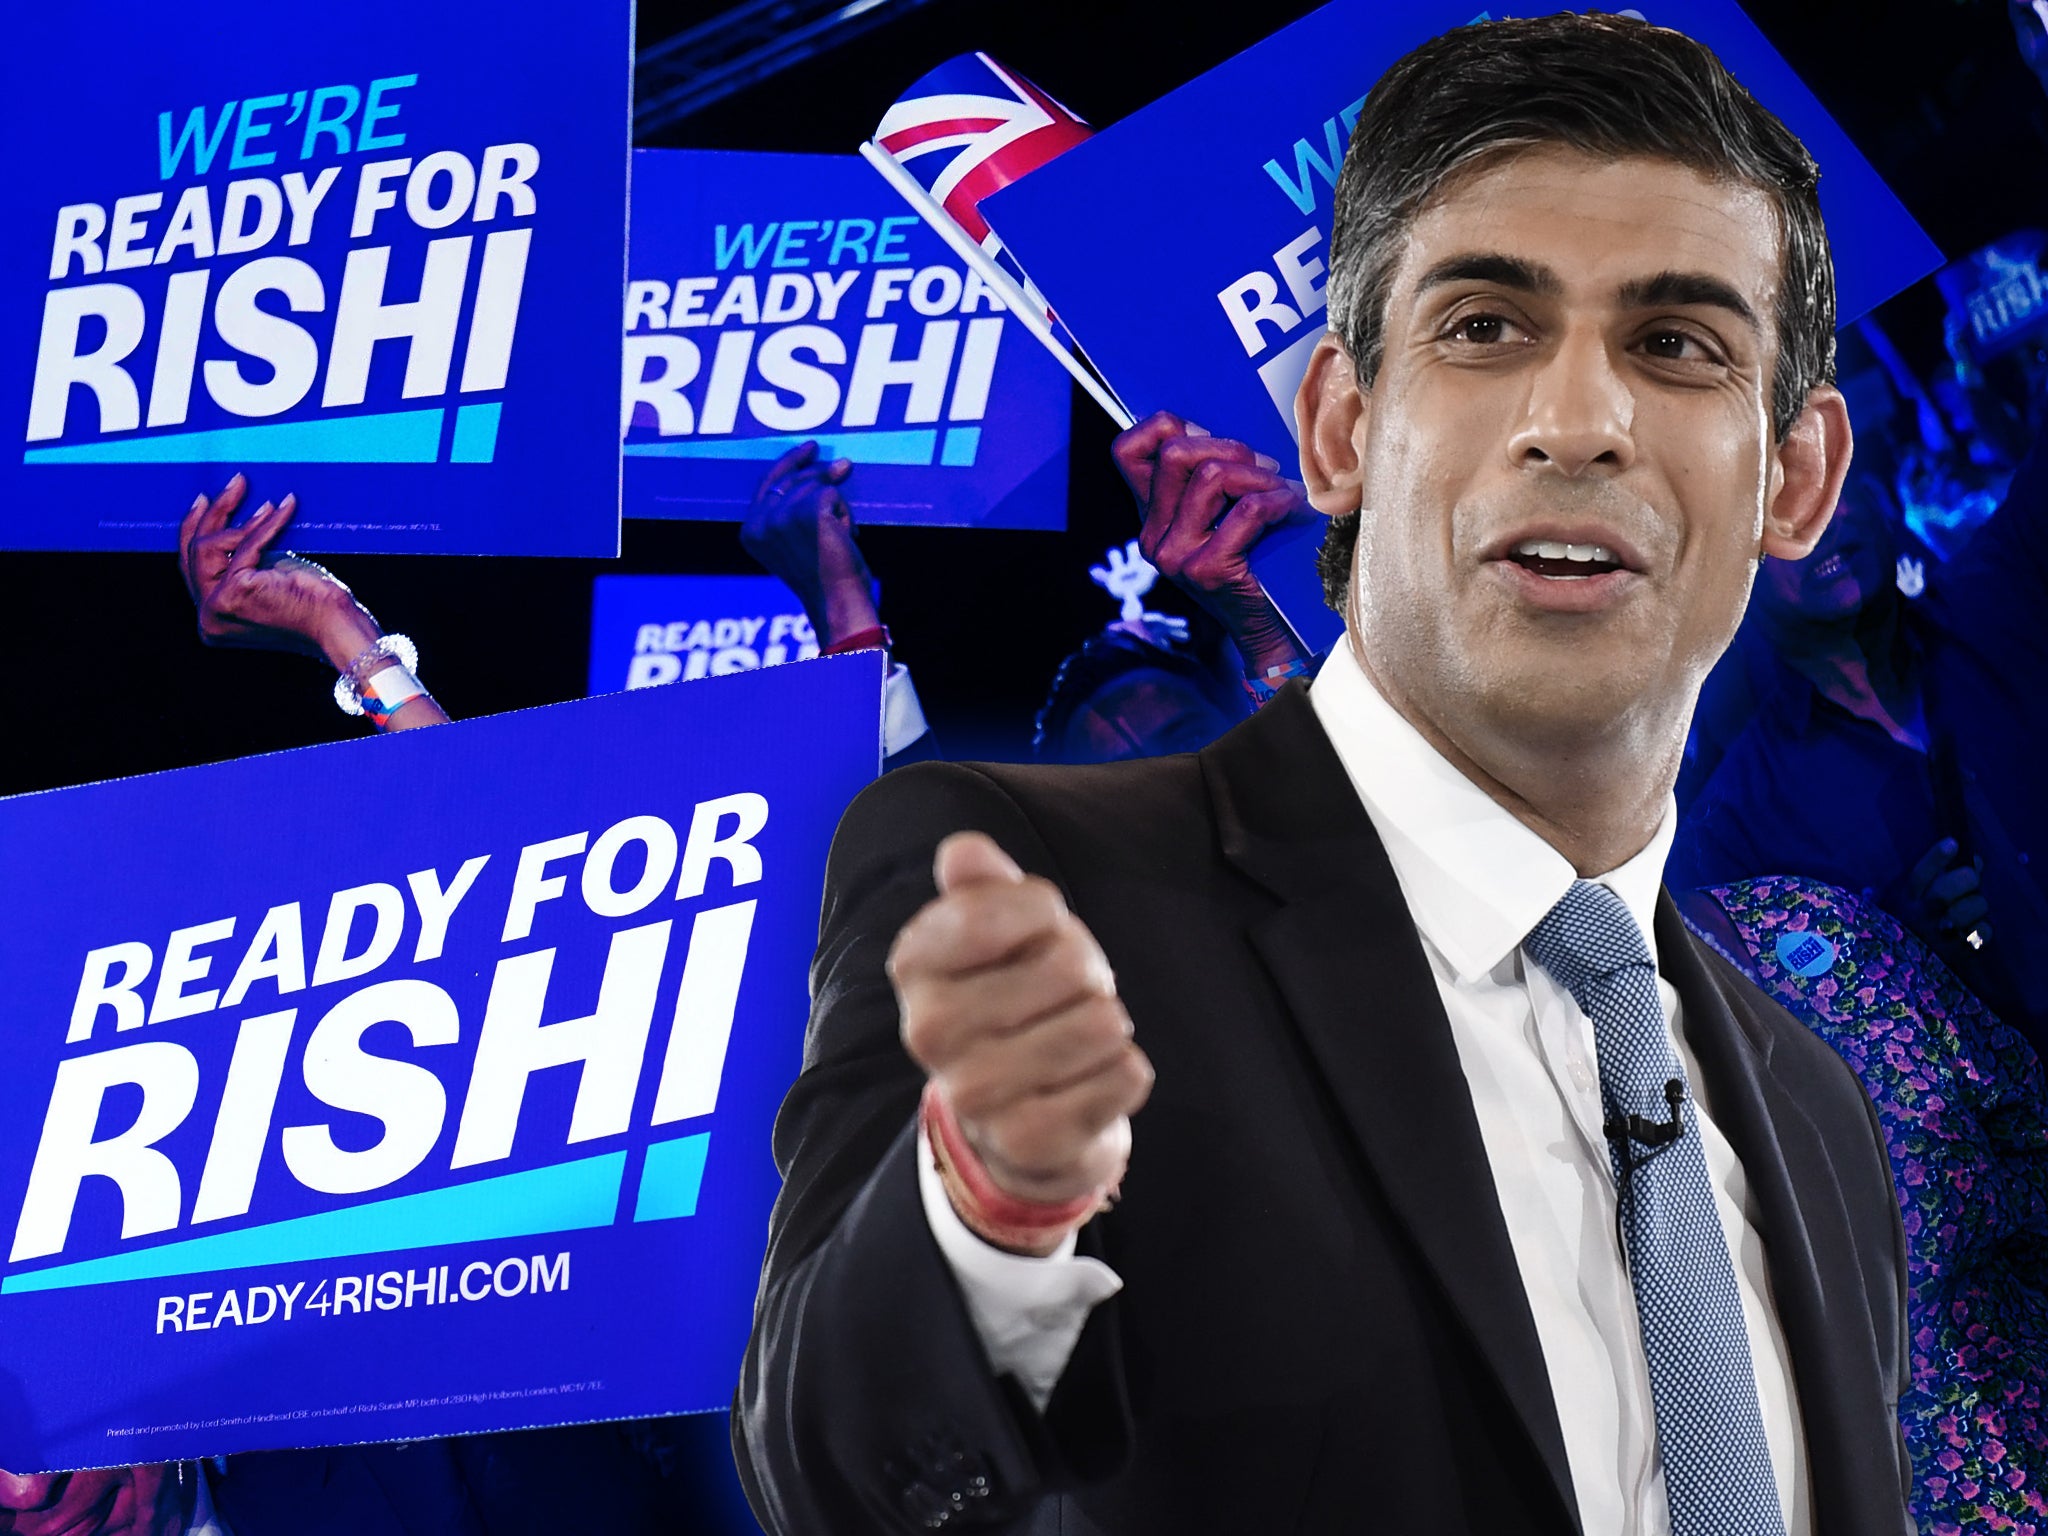 Rishi Sunak had high hopes of taking over as leader of the Conservative party